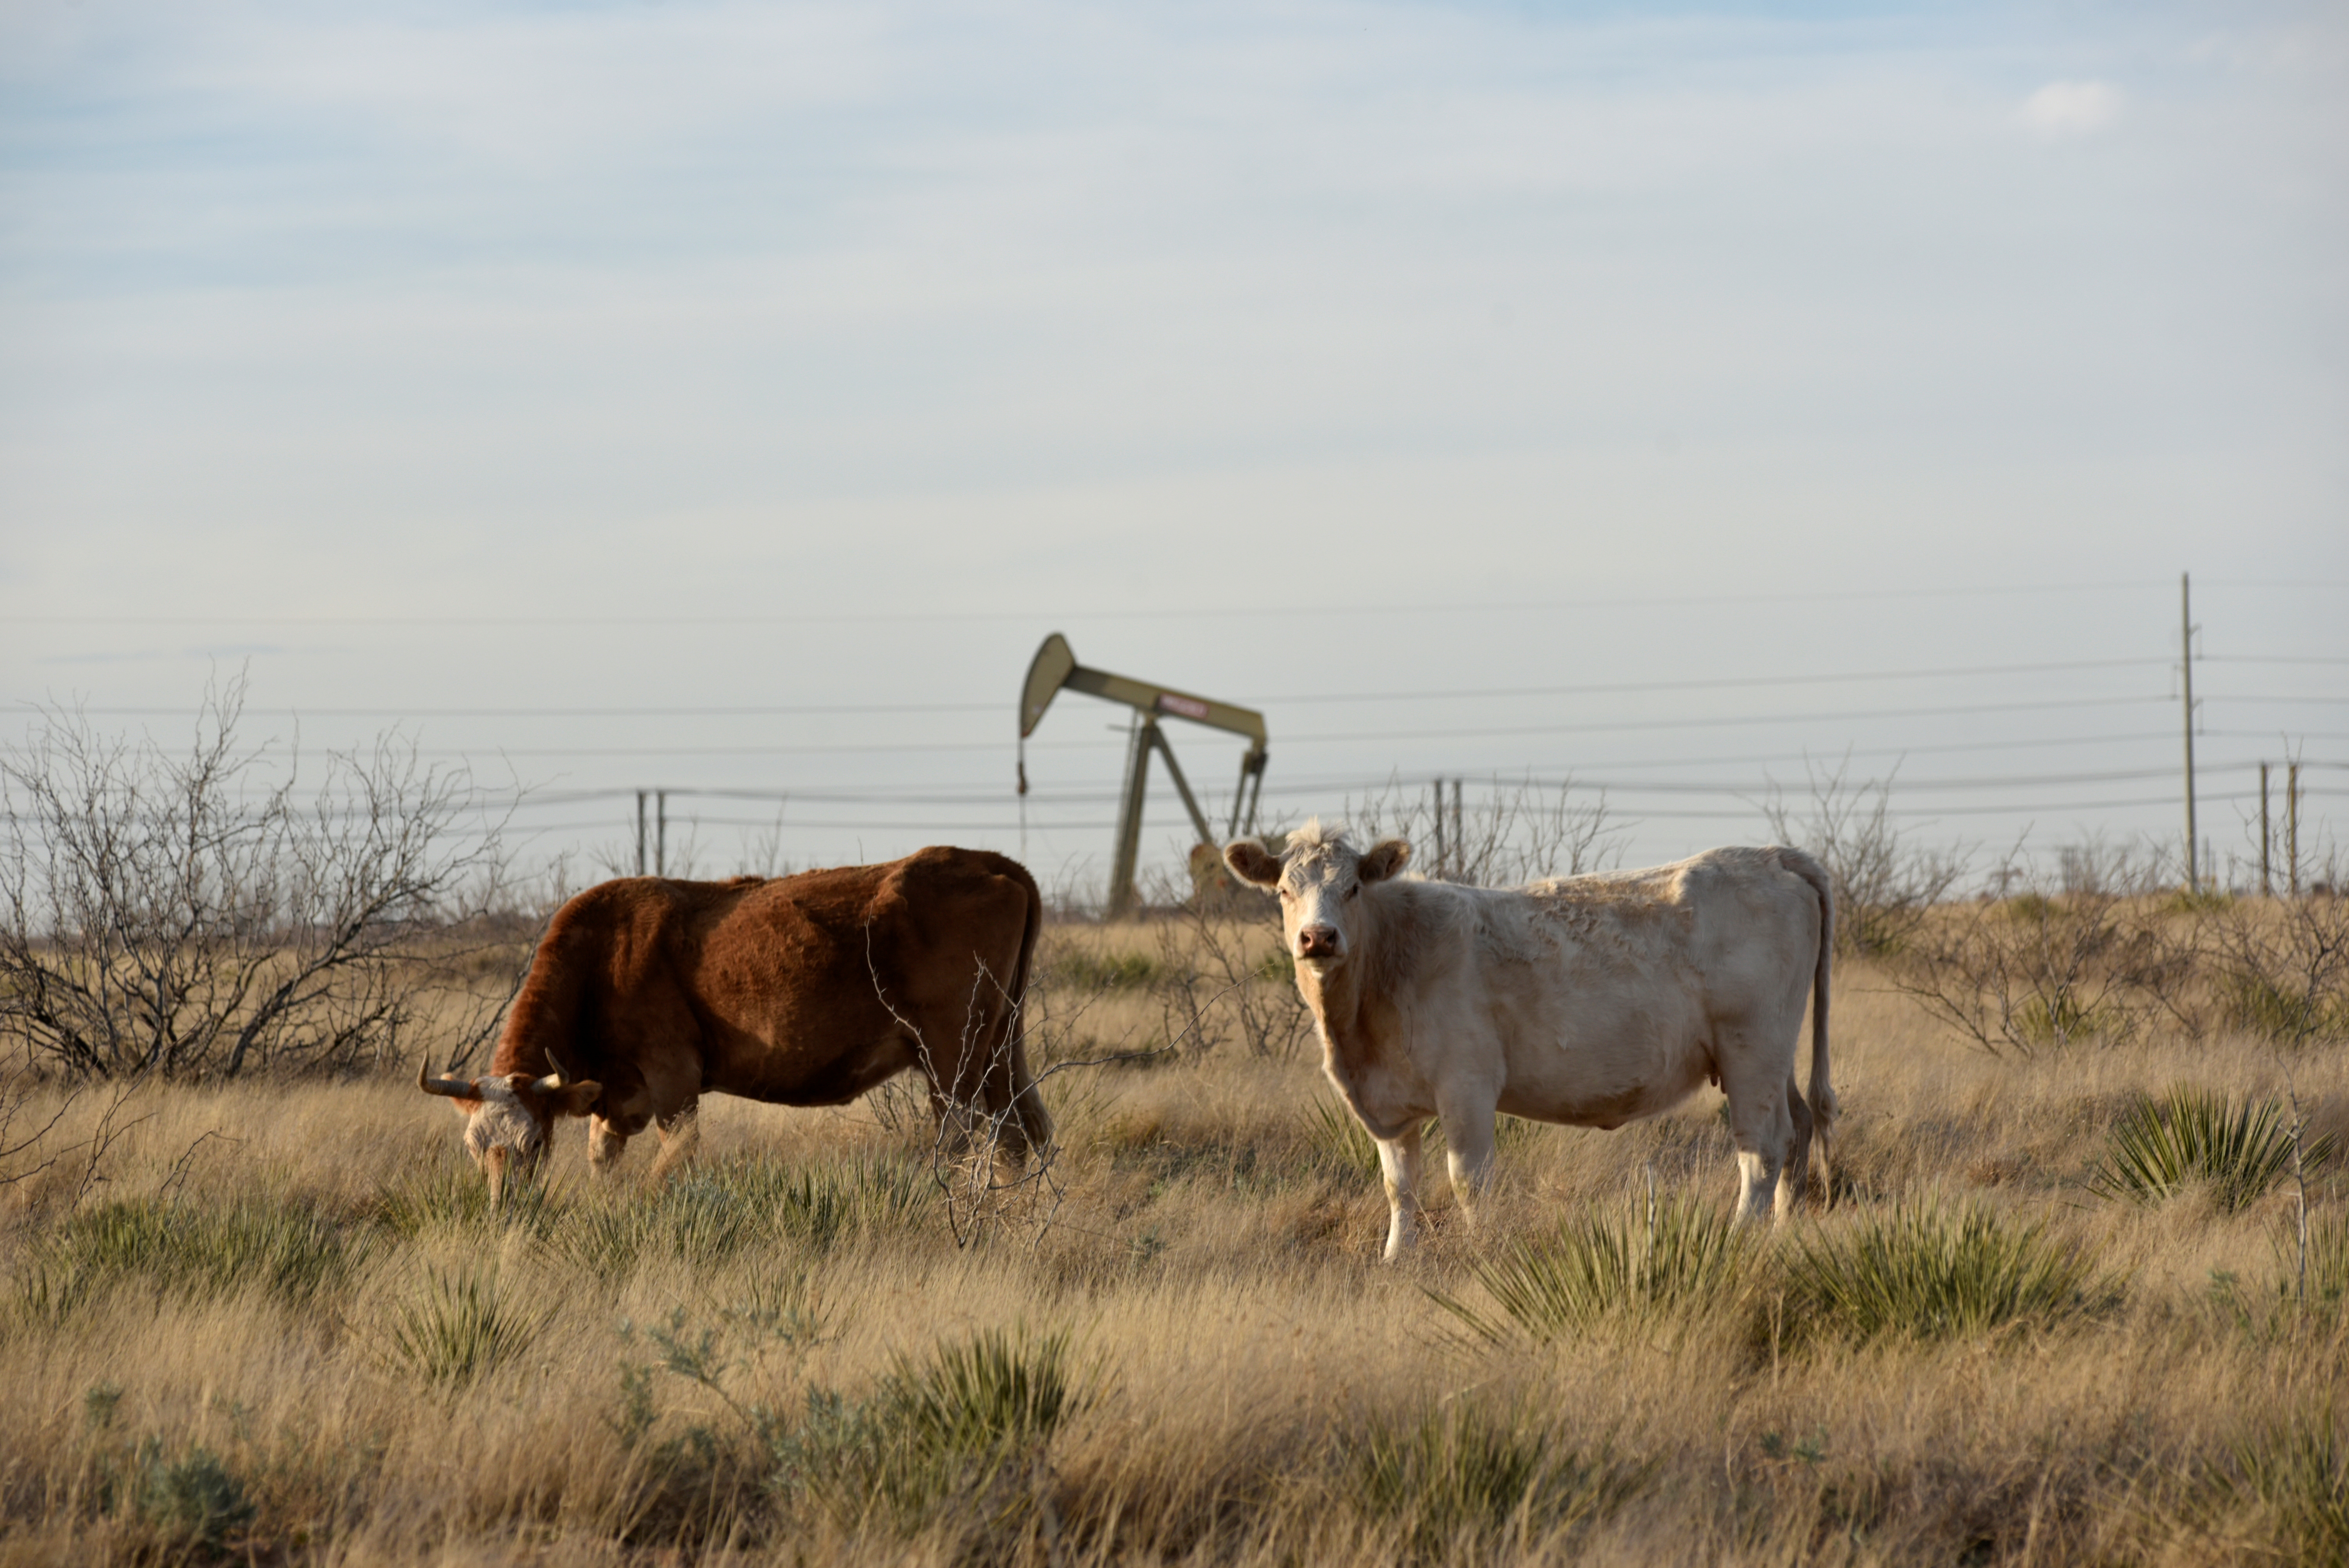 Cows graze in an oil production field in Midland